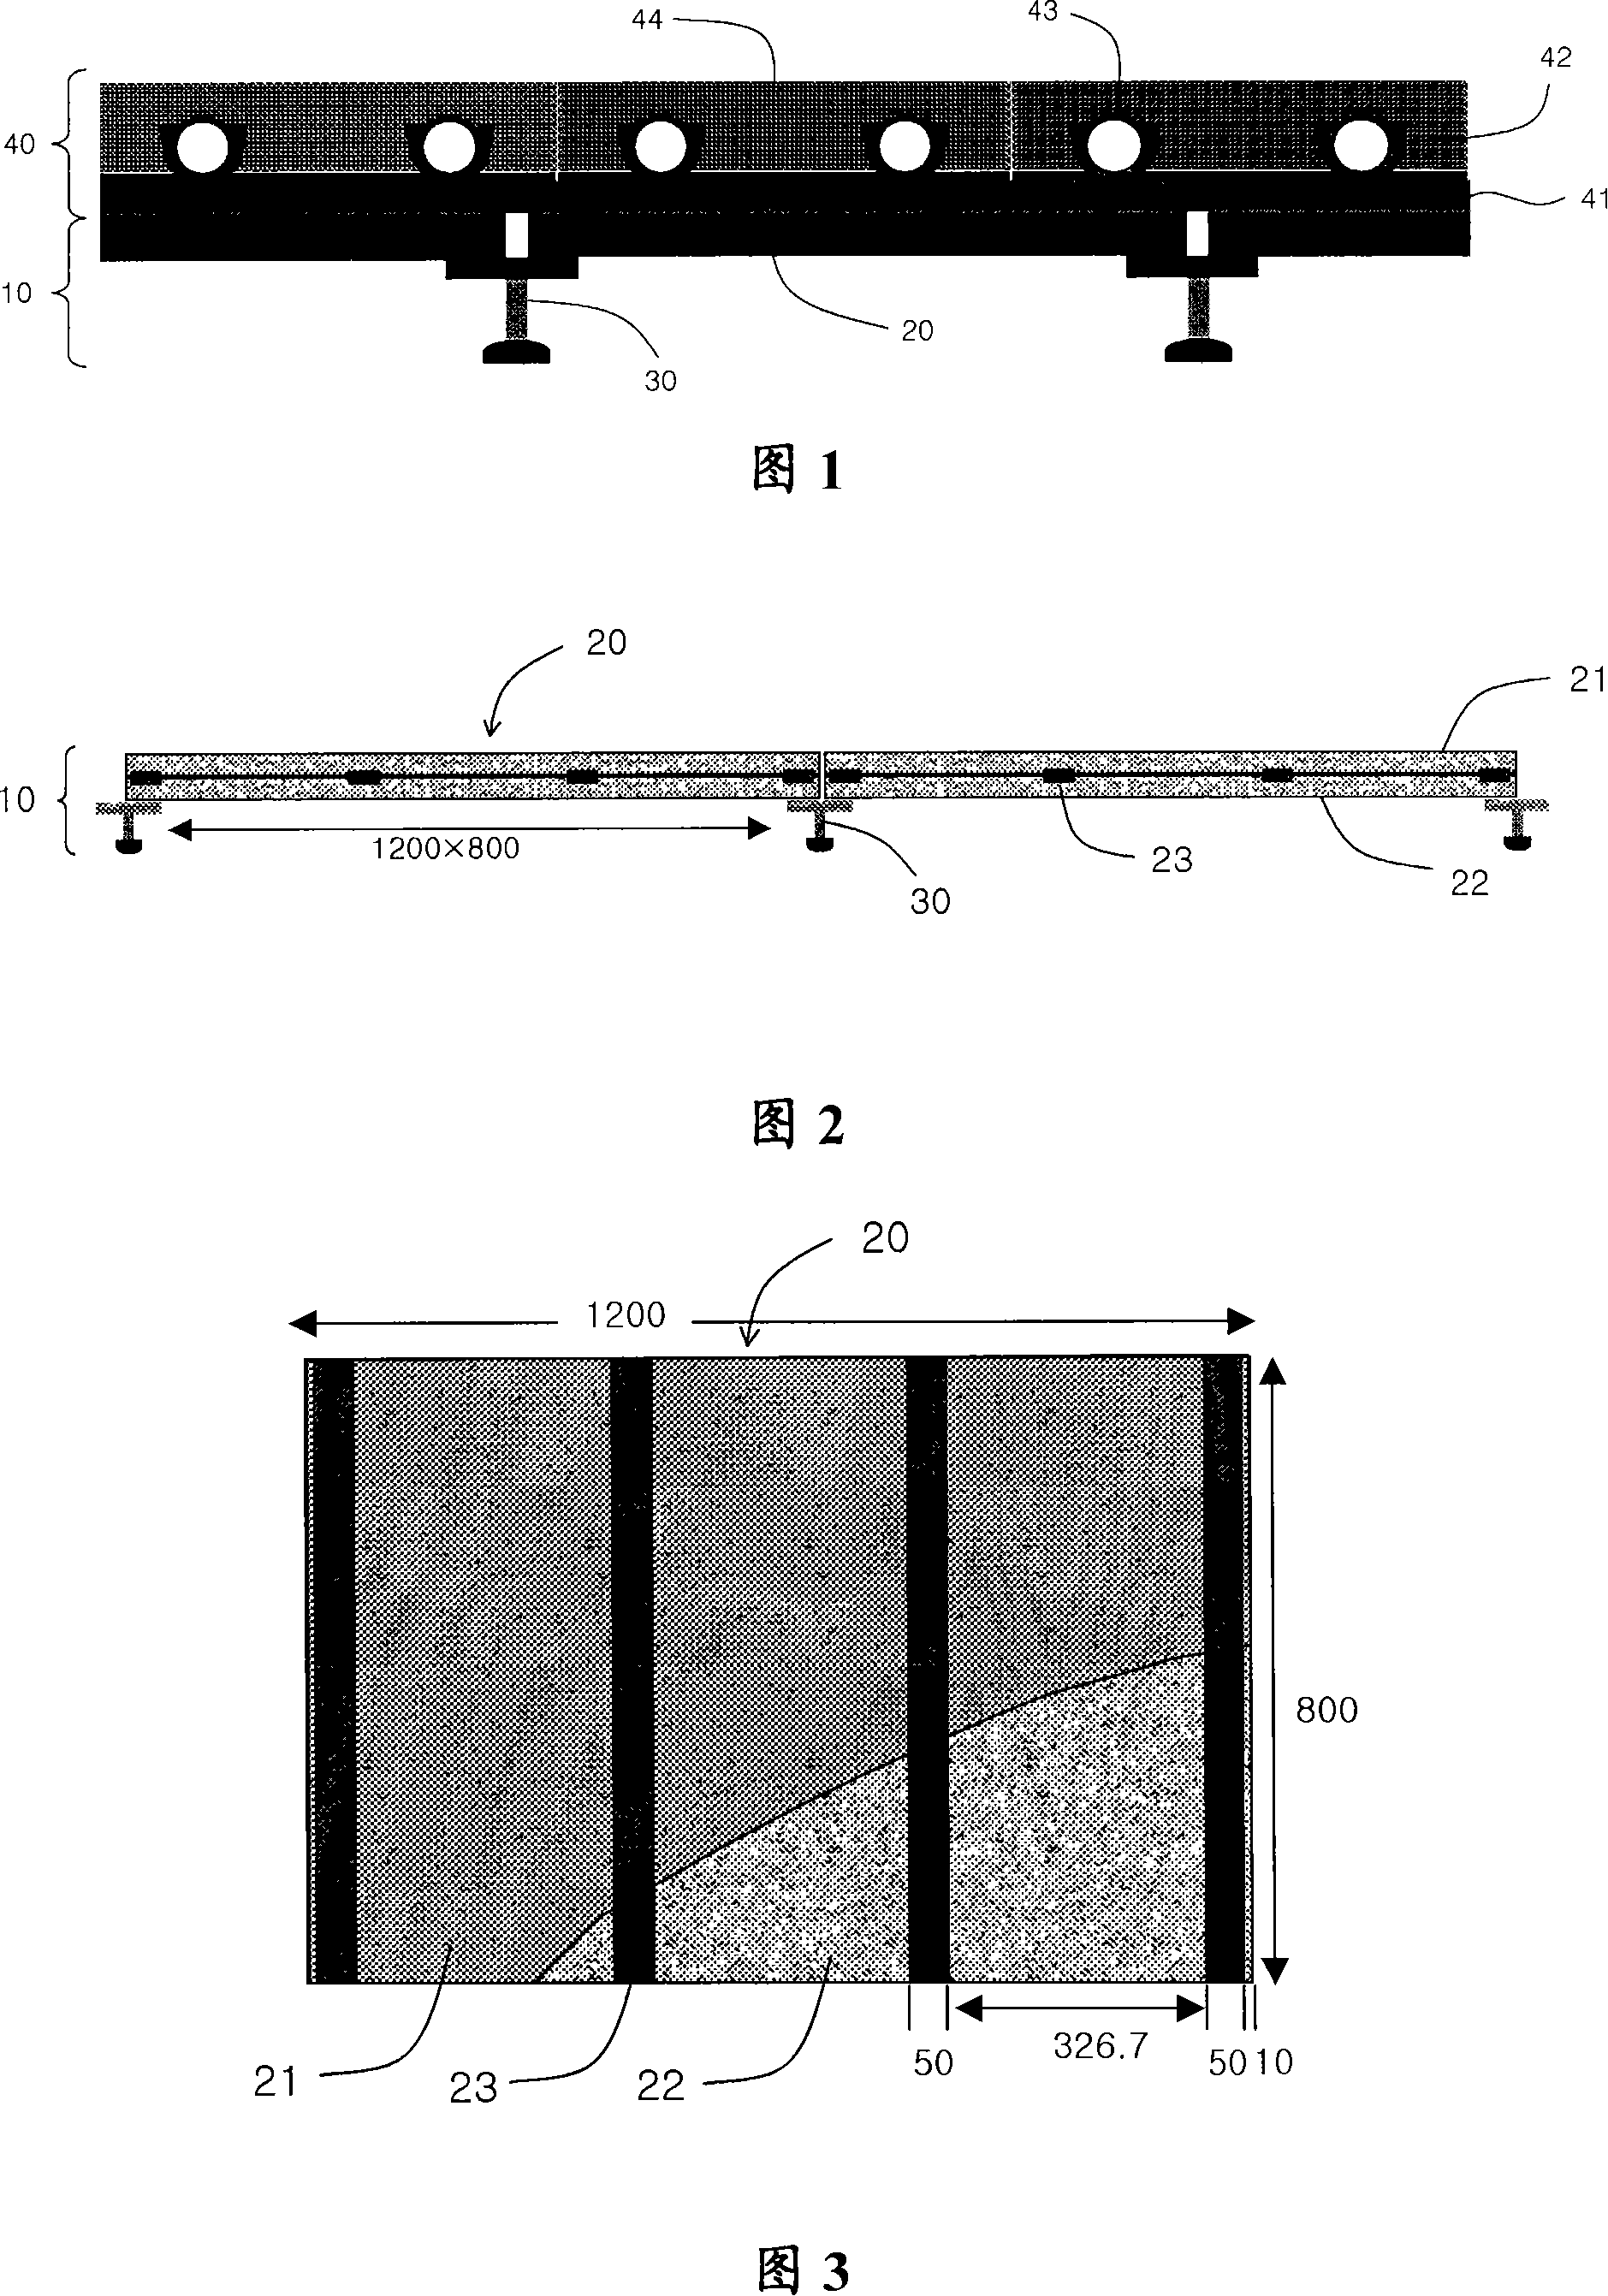 Heating system for reducing floor impact sound using heating piping method